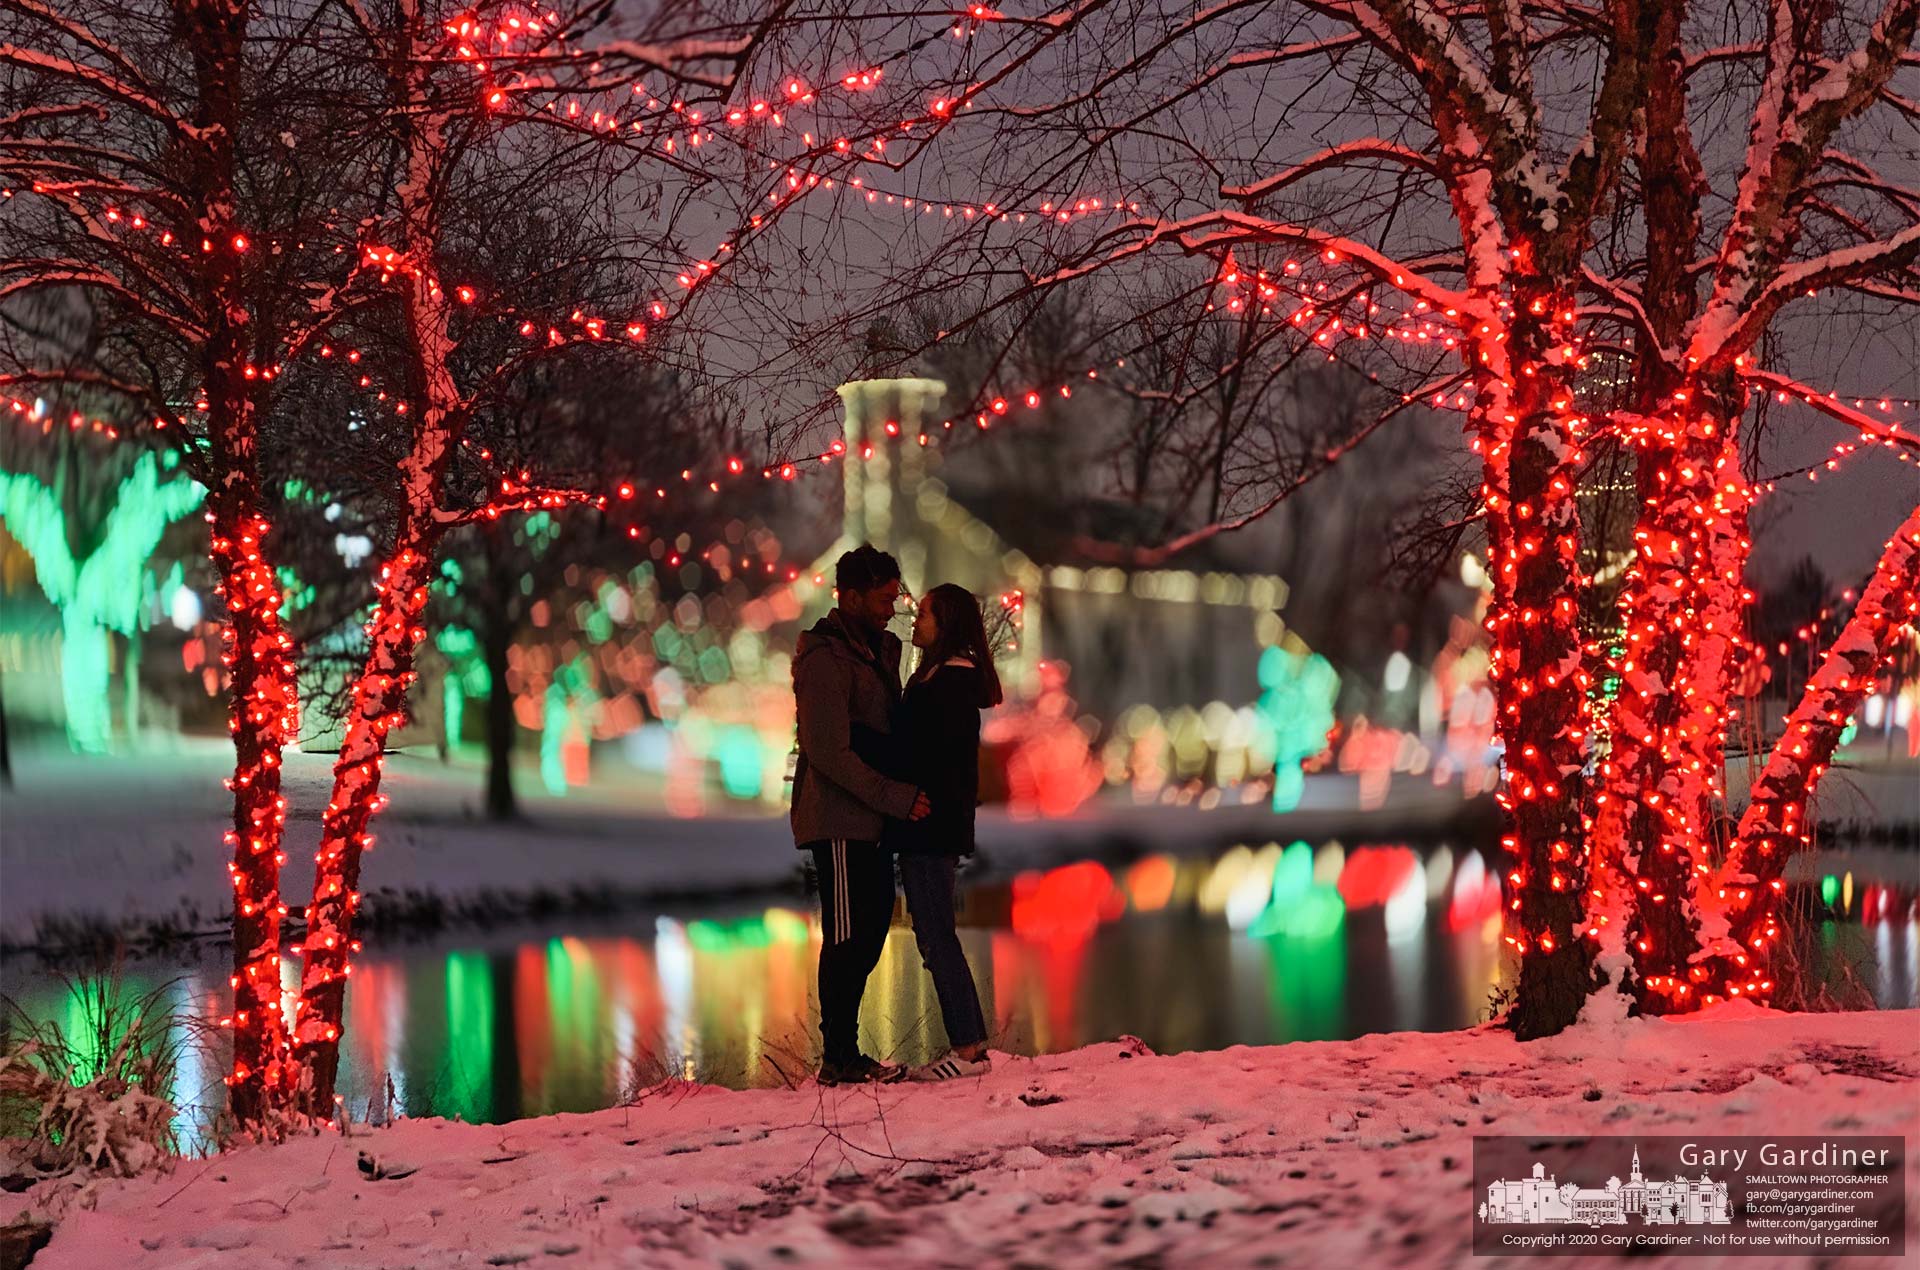 A young couple celebrating an anniversary poses for a photo among the Christmas lights at Heritage Park. My Final Photo for Dec. 17, 2020.